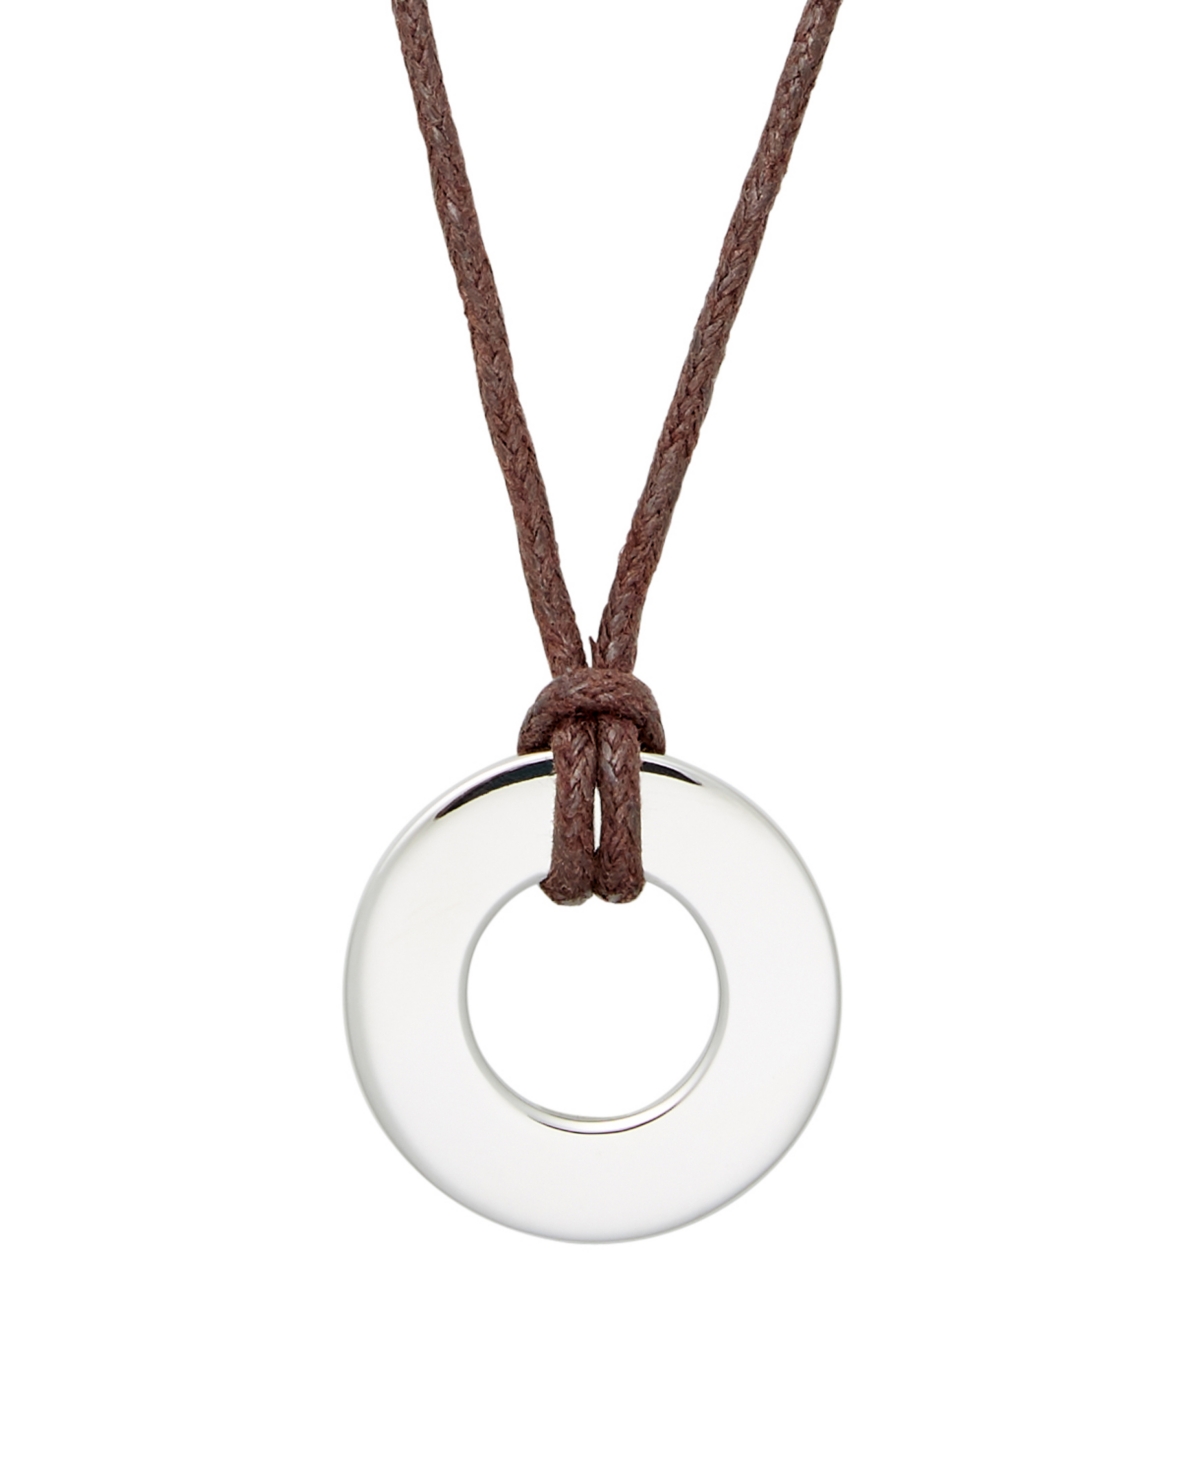 Eve's Jewelry Men's Brown Cord Circle Pendant Necklace